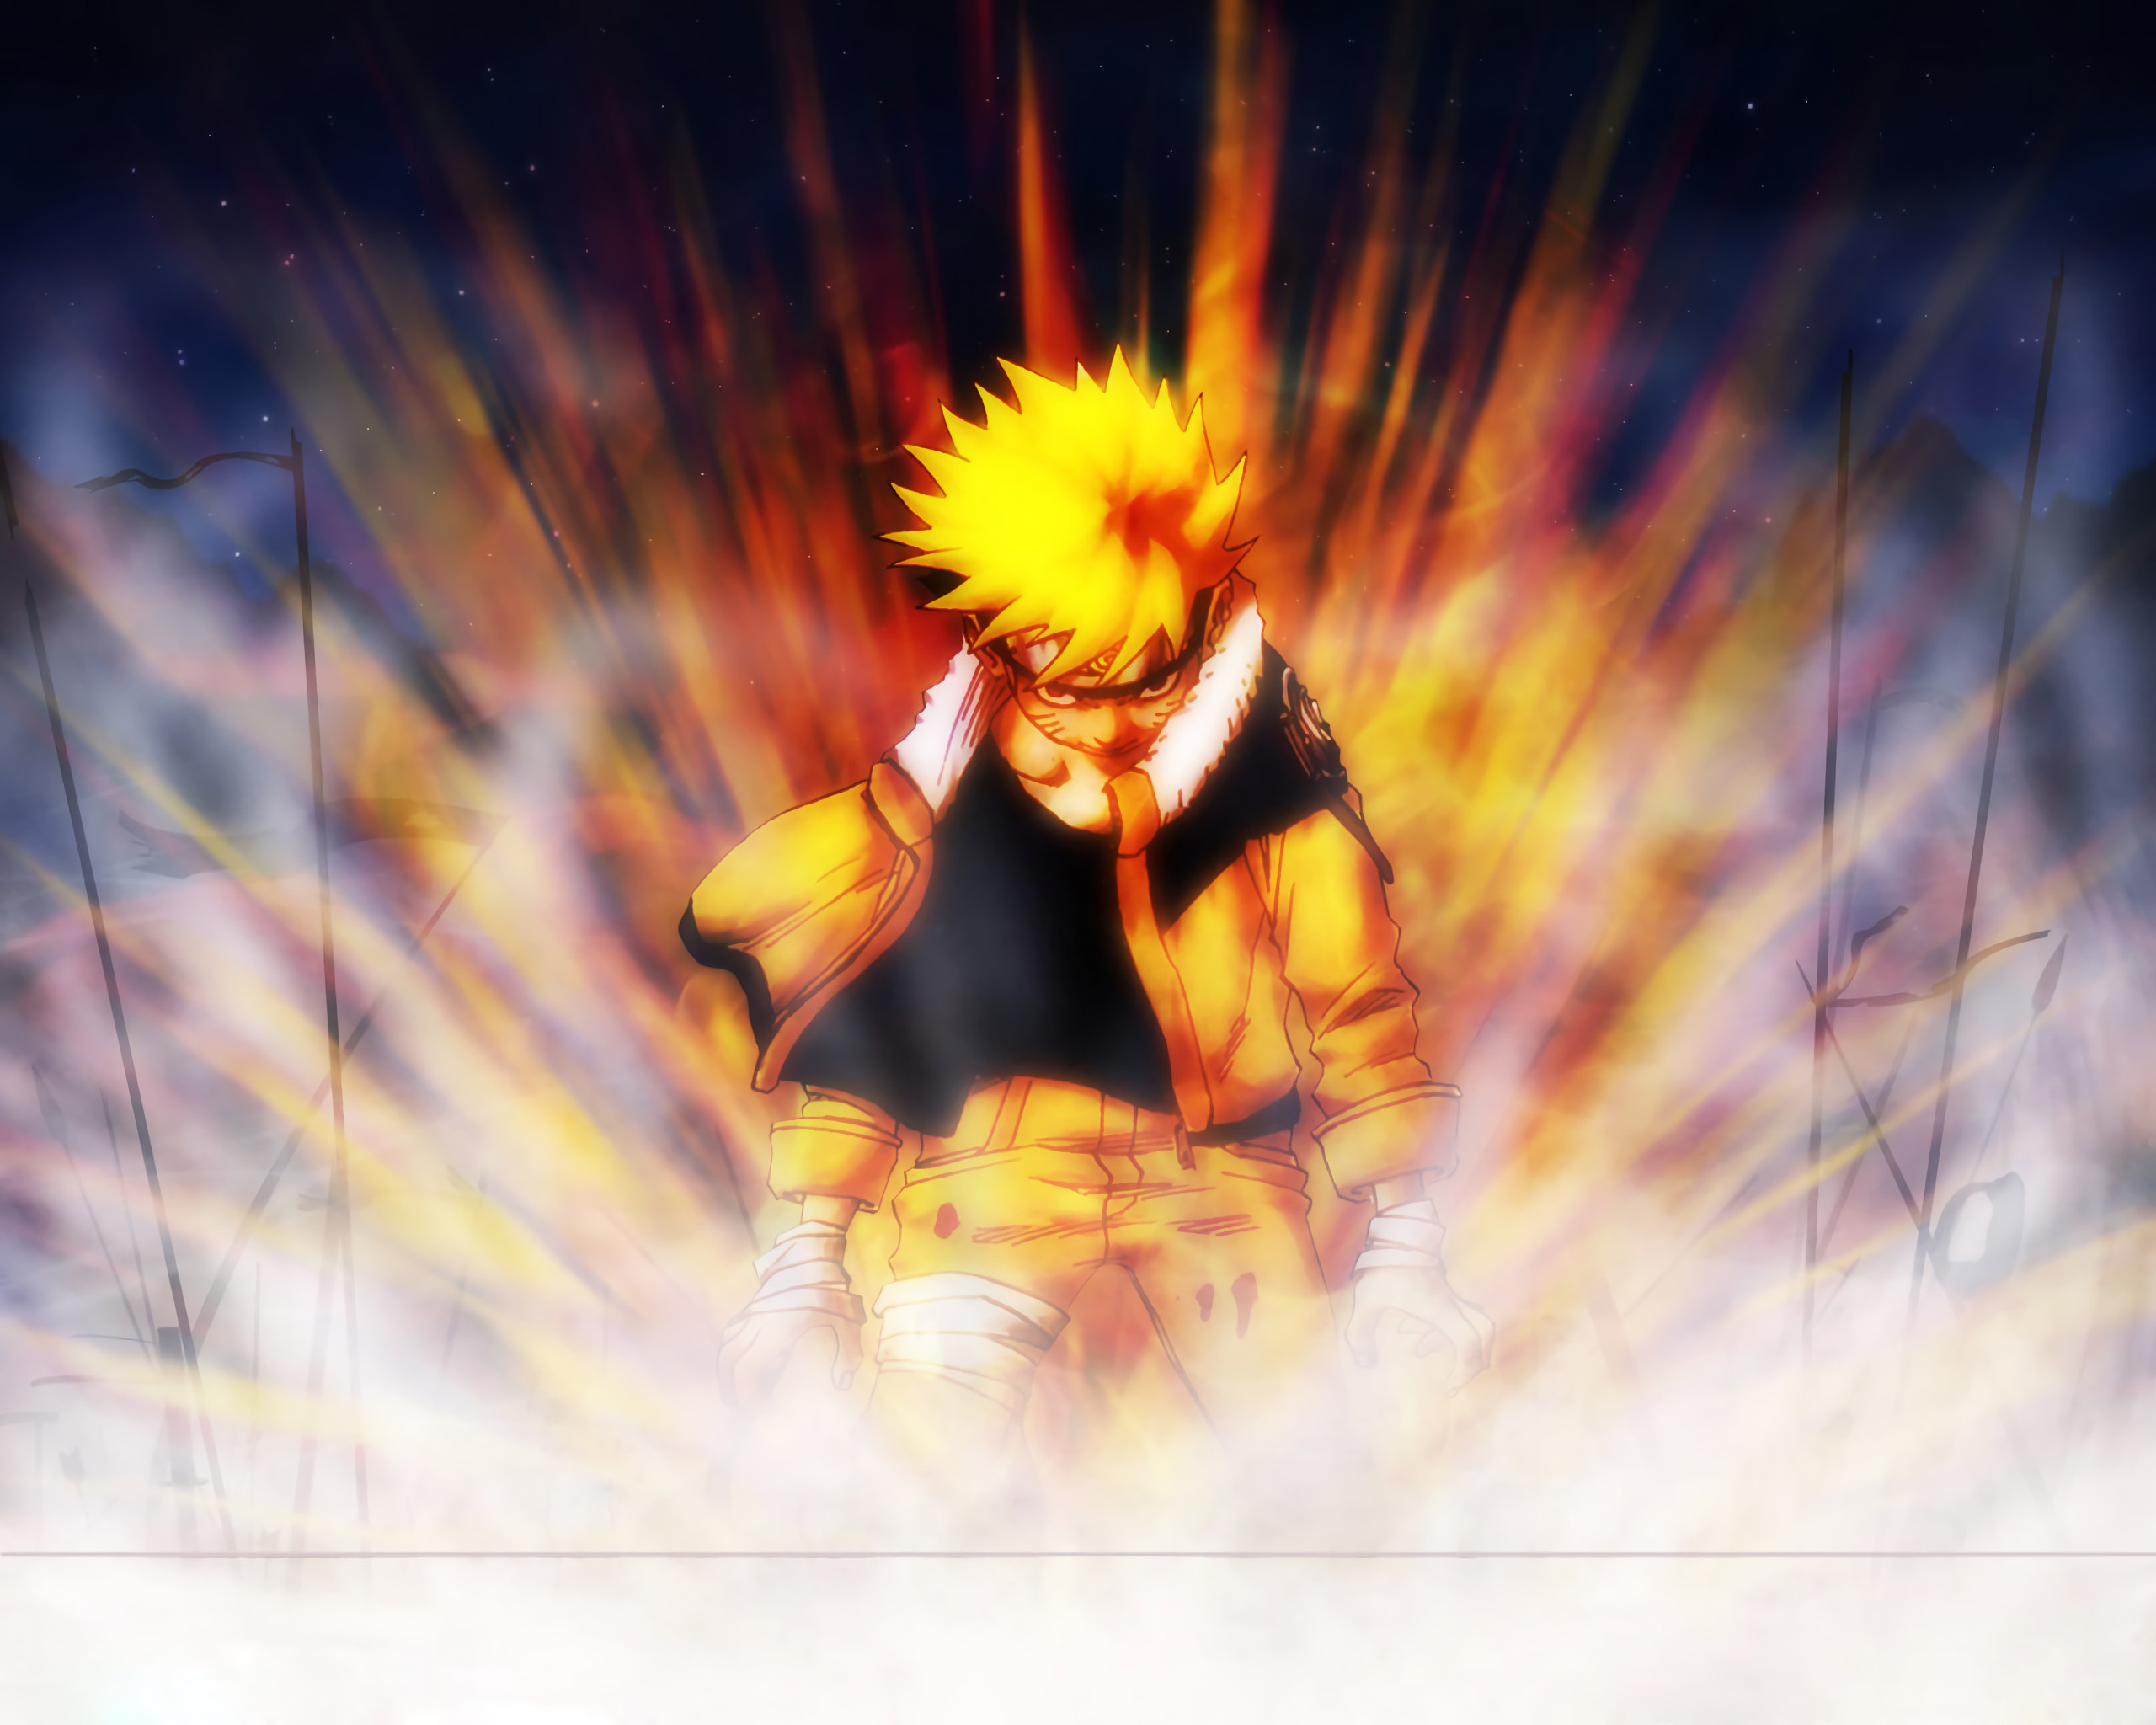 2560x2048 5 naruto hd wallpapers background images wallpaper 2